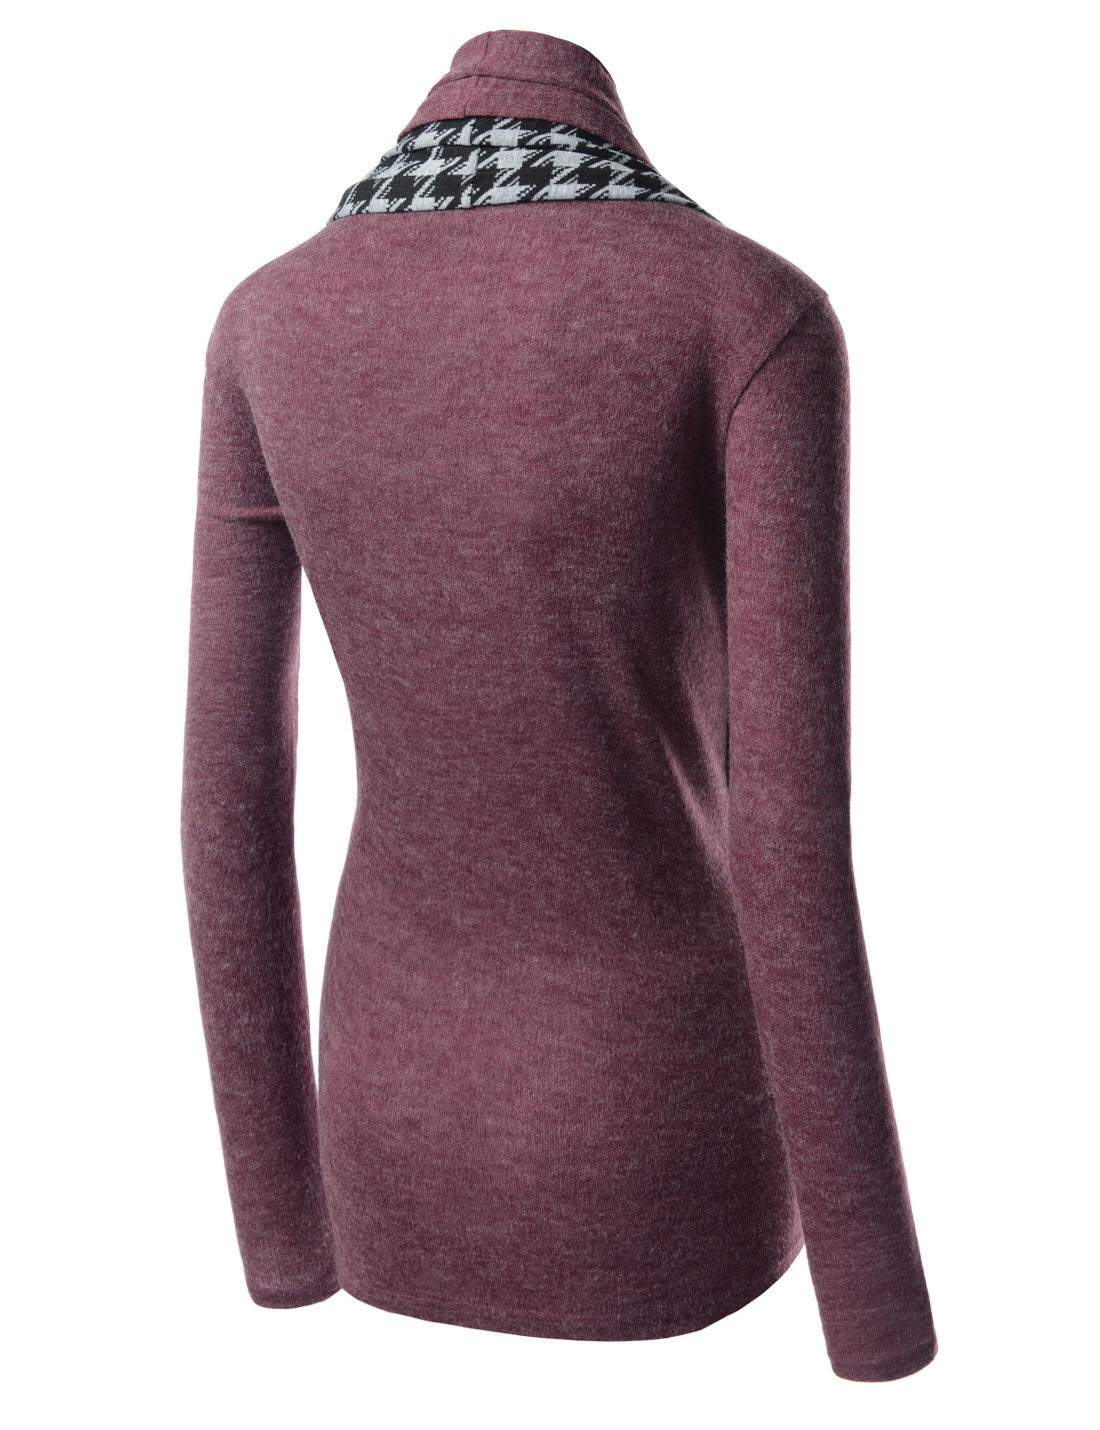 Burgundy Red Houndstooth Shawl Collar Knitted Open Cardigans